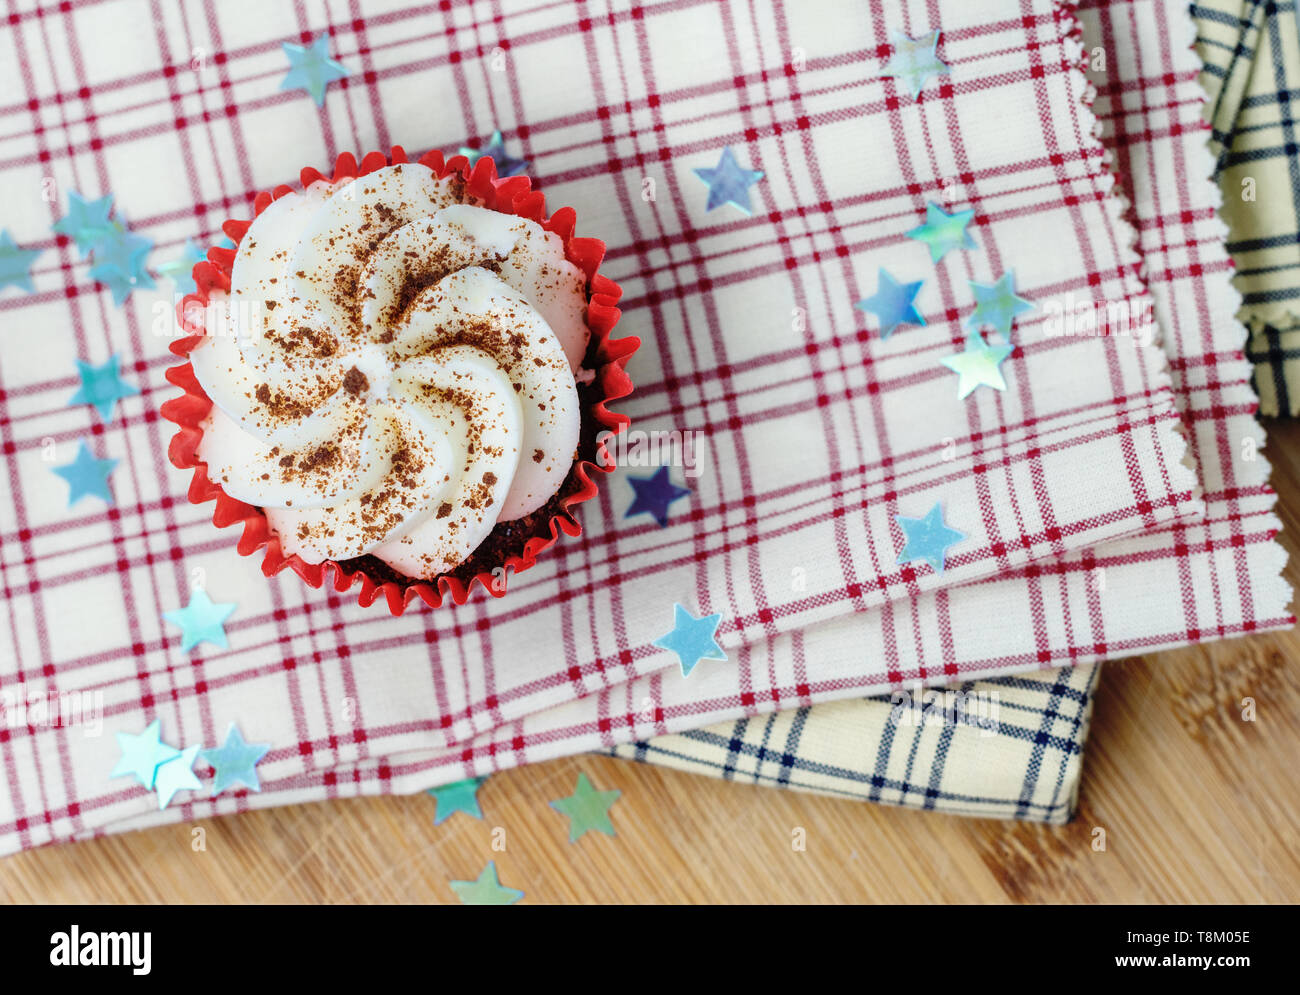 Red velvet cupcake on plaid cloth with decorative stars and a shallow depth of field Stock Photo